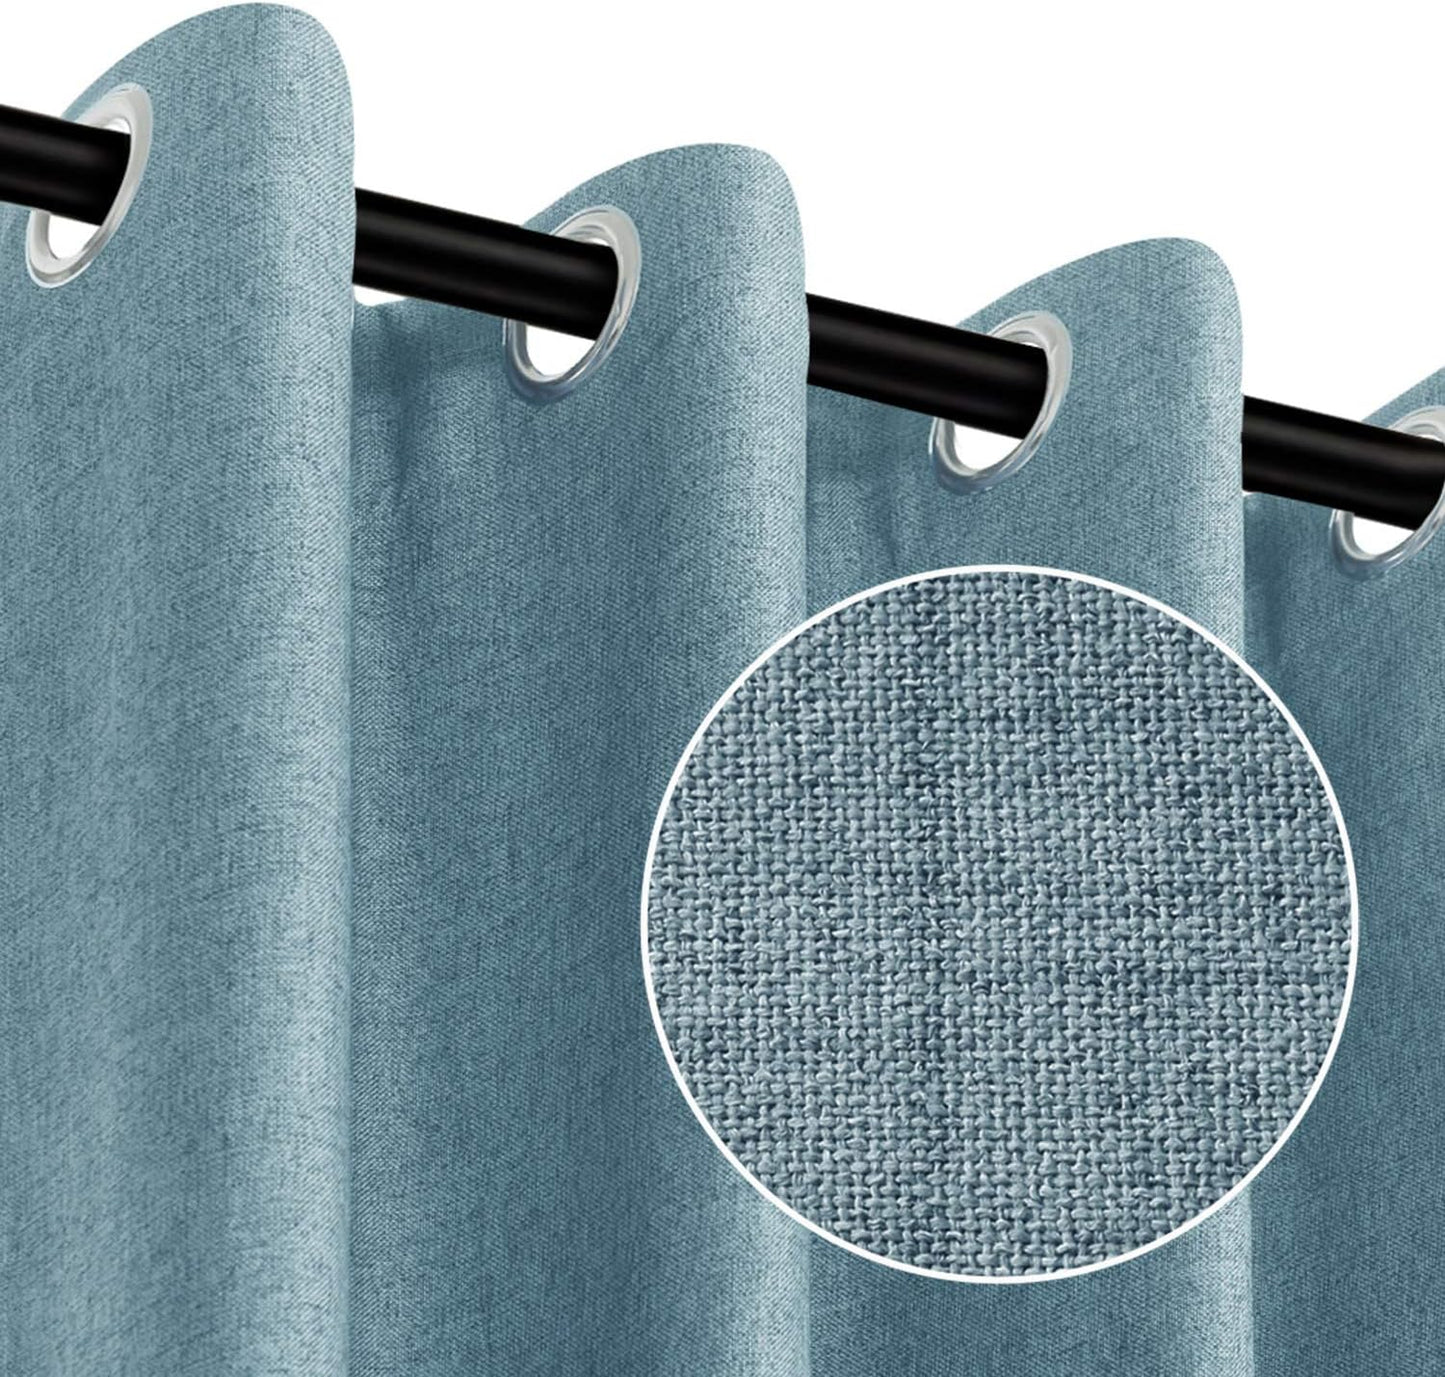 RHF Blackout Curtains 84 Inch Length 2 Panels Set, Primitive Linen Look, 100% Blackout Curtains Linen Black Out Curtains for Bedroom Windows, Burlap Grommet Curtains-(50X84, Oatmeal)  Rose Home Fashion Teal Blue W50 X L108 